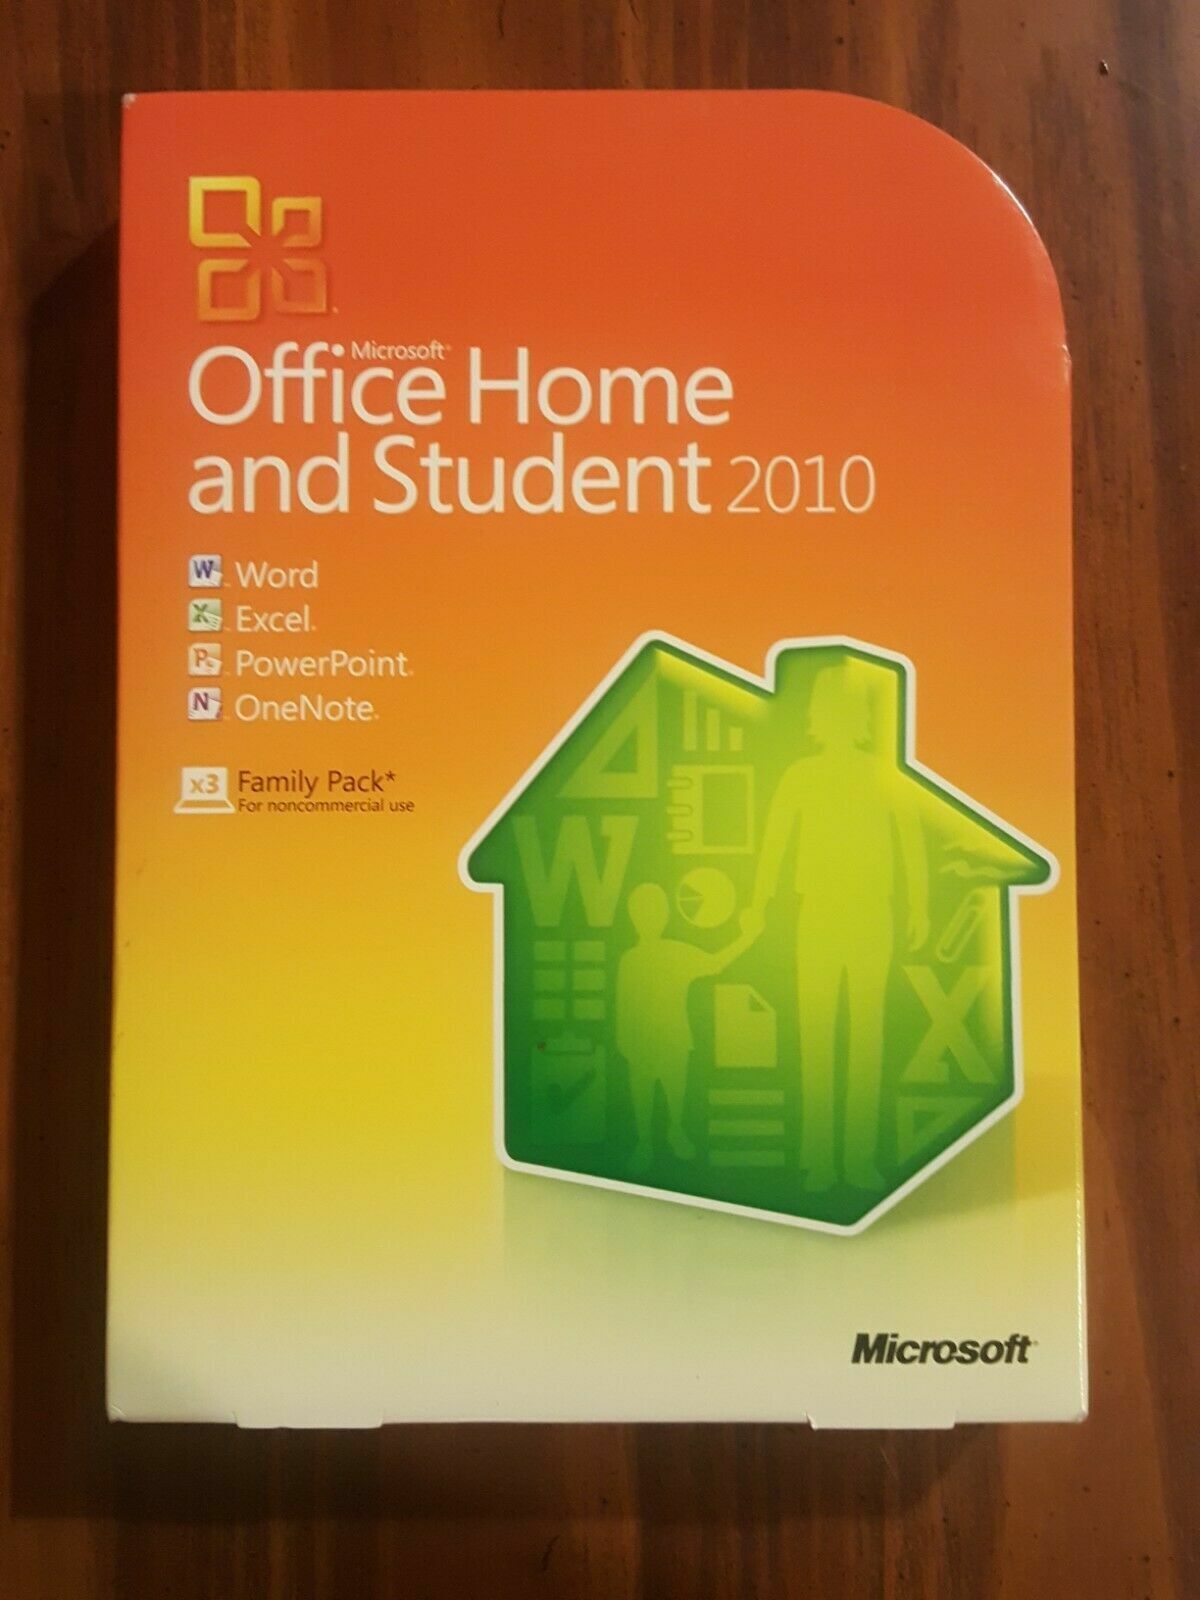 Genuine Microsoft Office 2010 Home and Student Family Pack for 3 PCs RETAIL Box